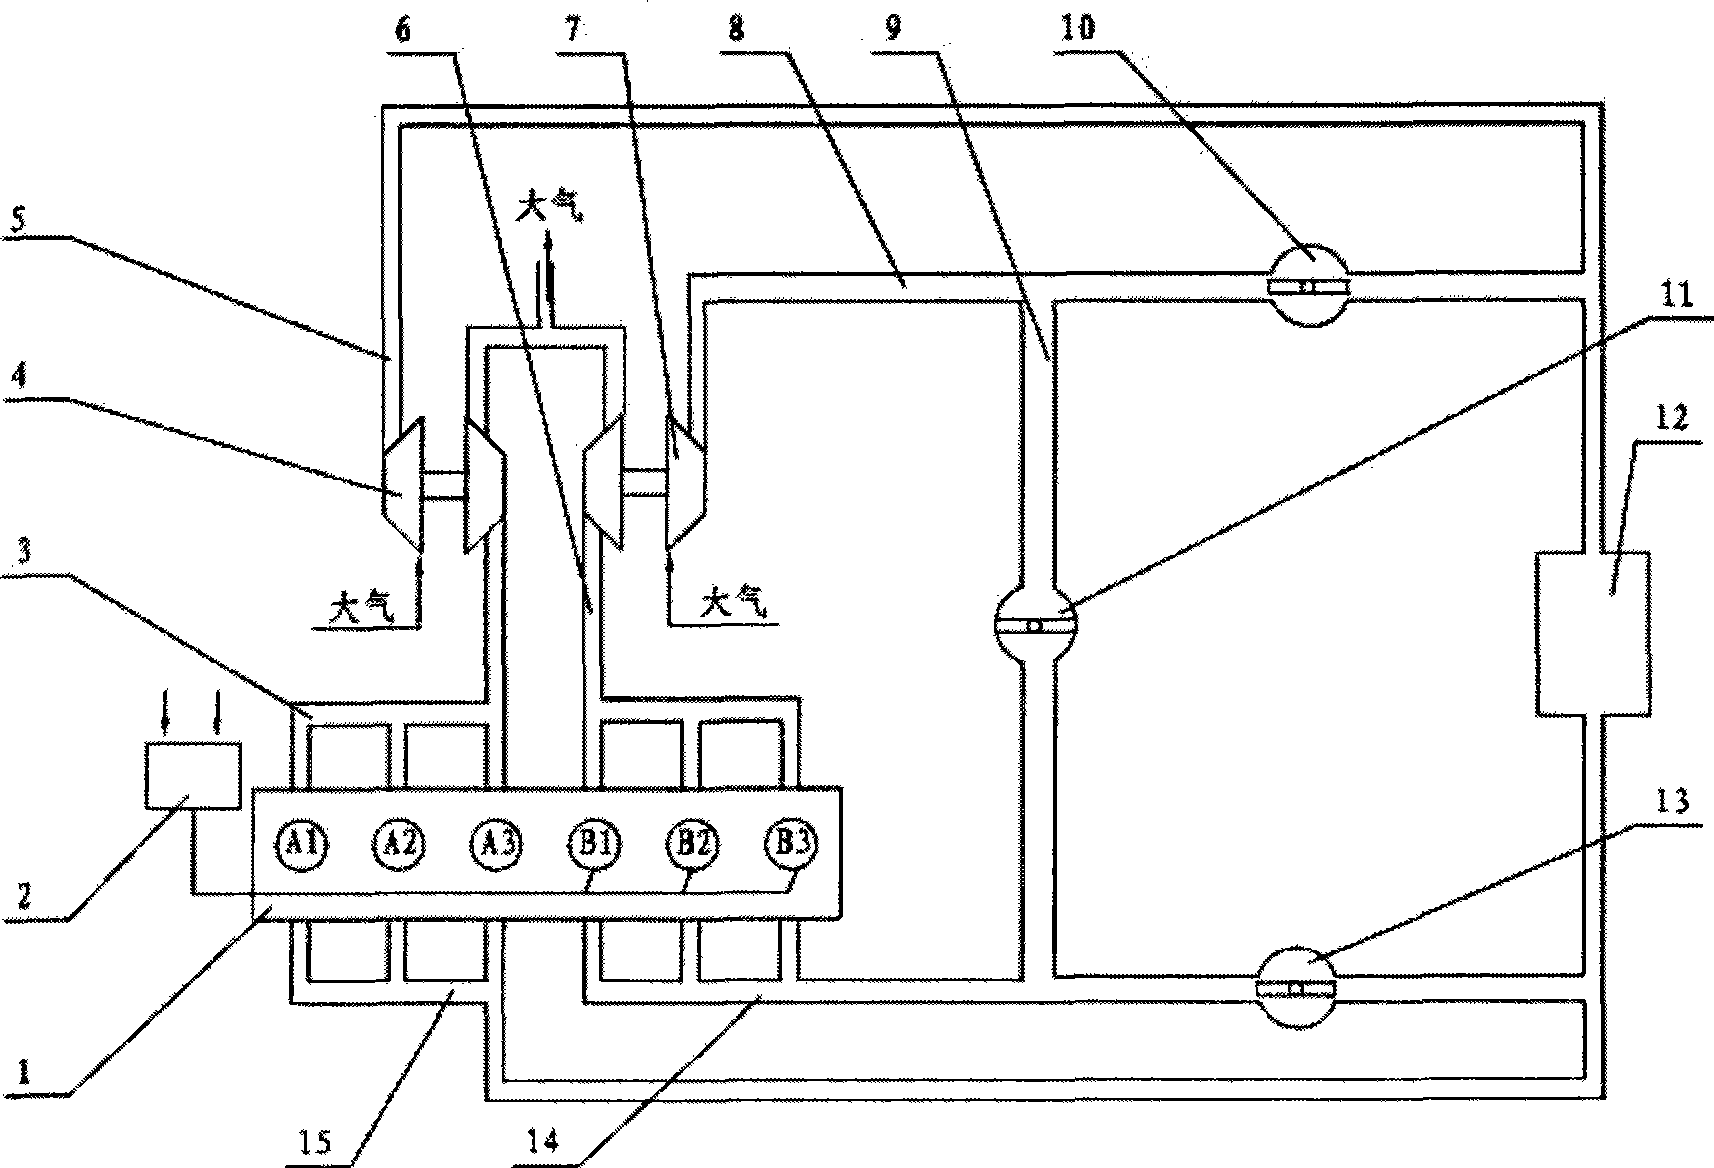 Diesel engine cylinder fuel-cut oil-saving system with twin-pressure charging system and pressure relief device